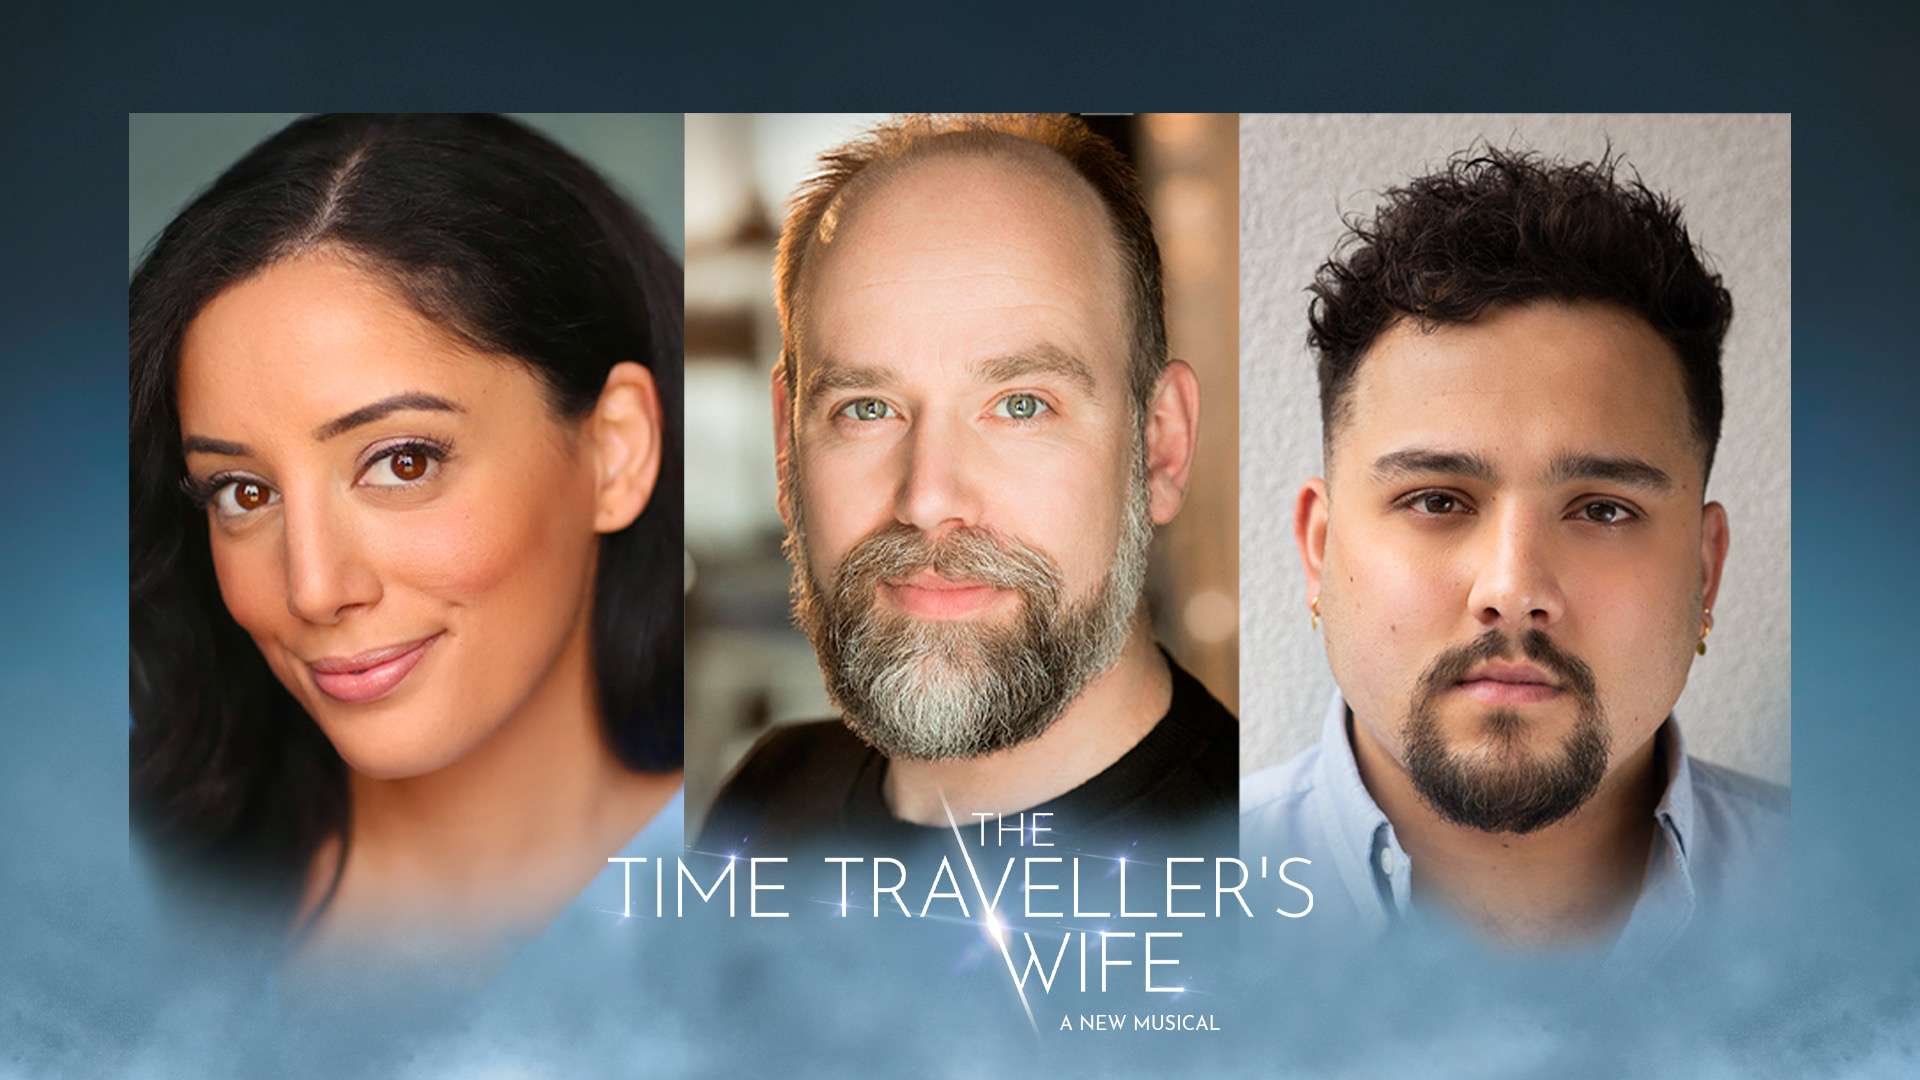 Joss Stone and Dave Stewart release new single “This Time” from The Time  Traveller's Wife musical